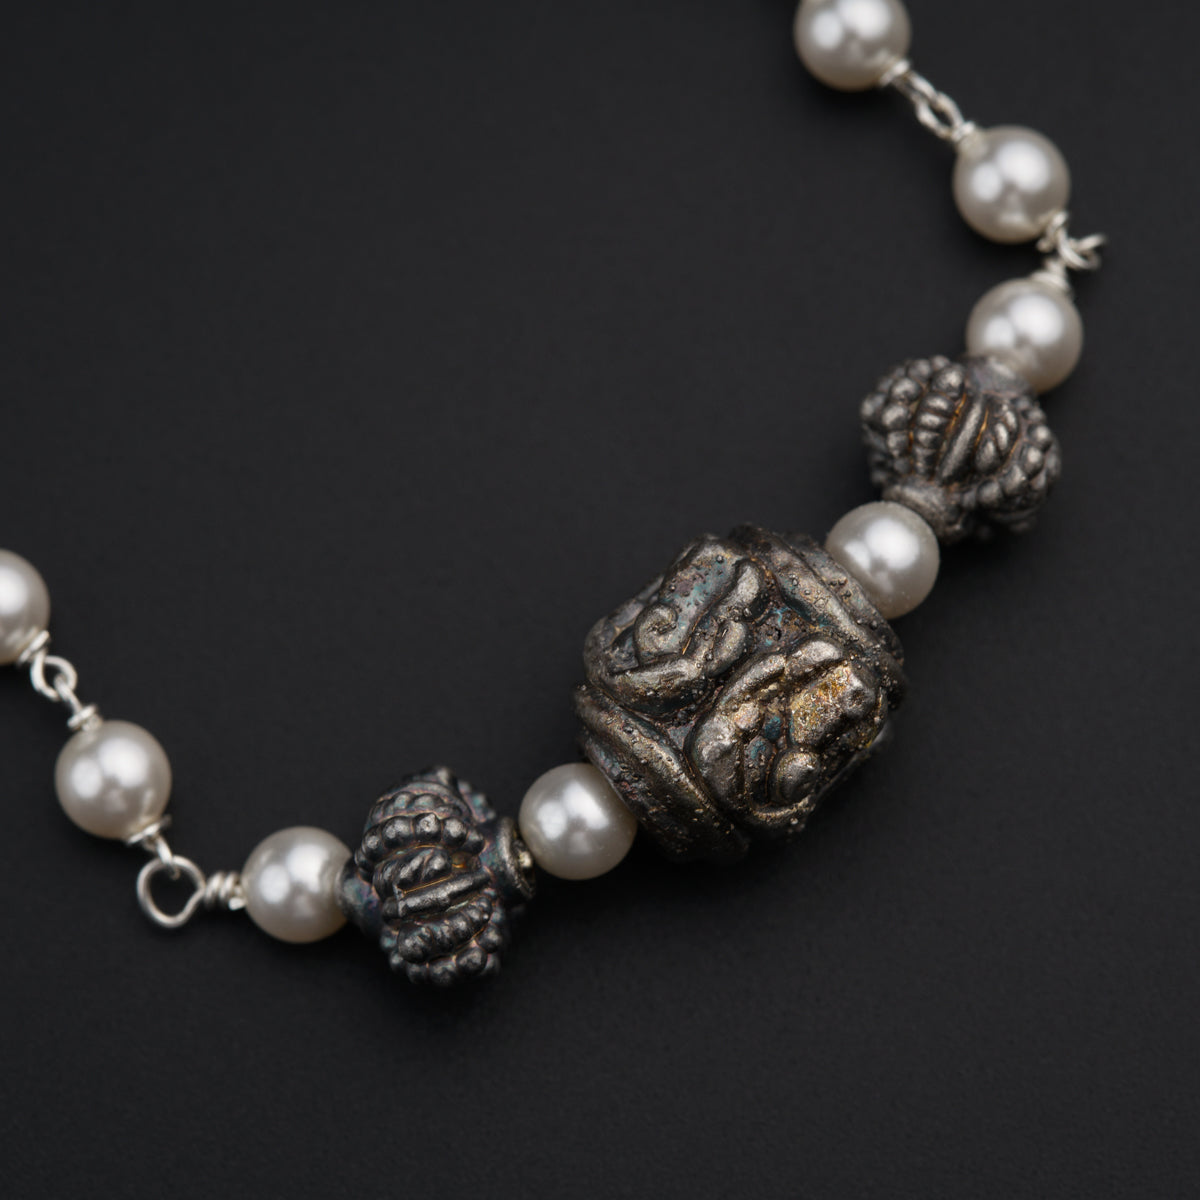 Silver Beads and Pearls Necklace